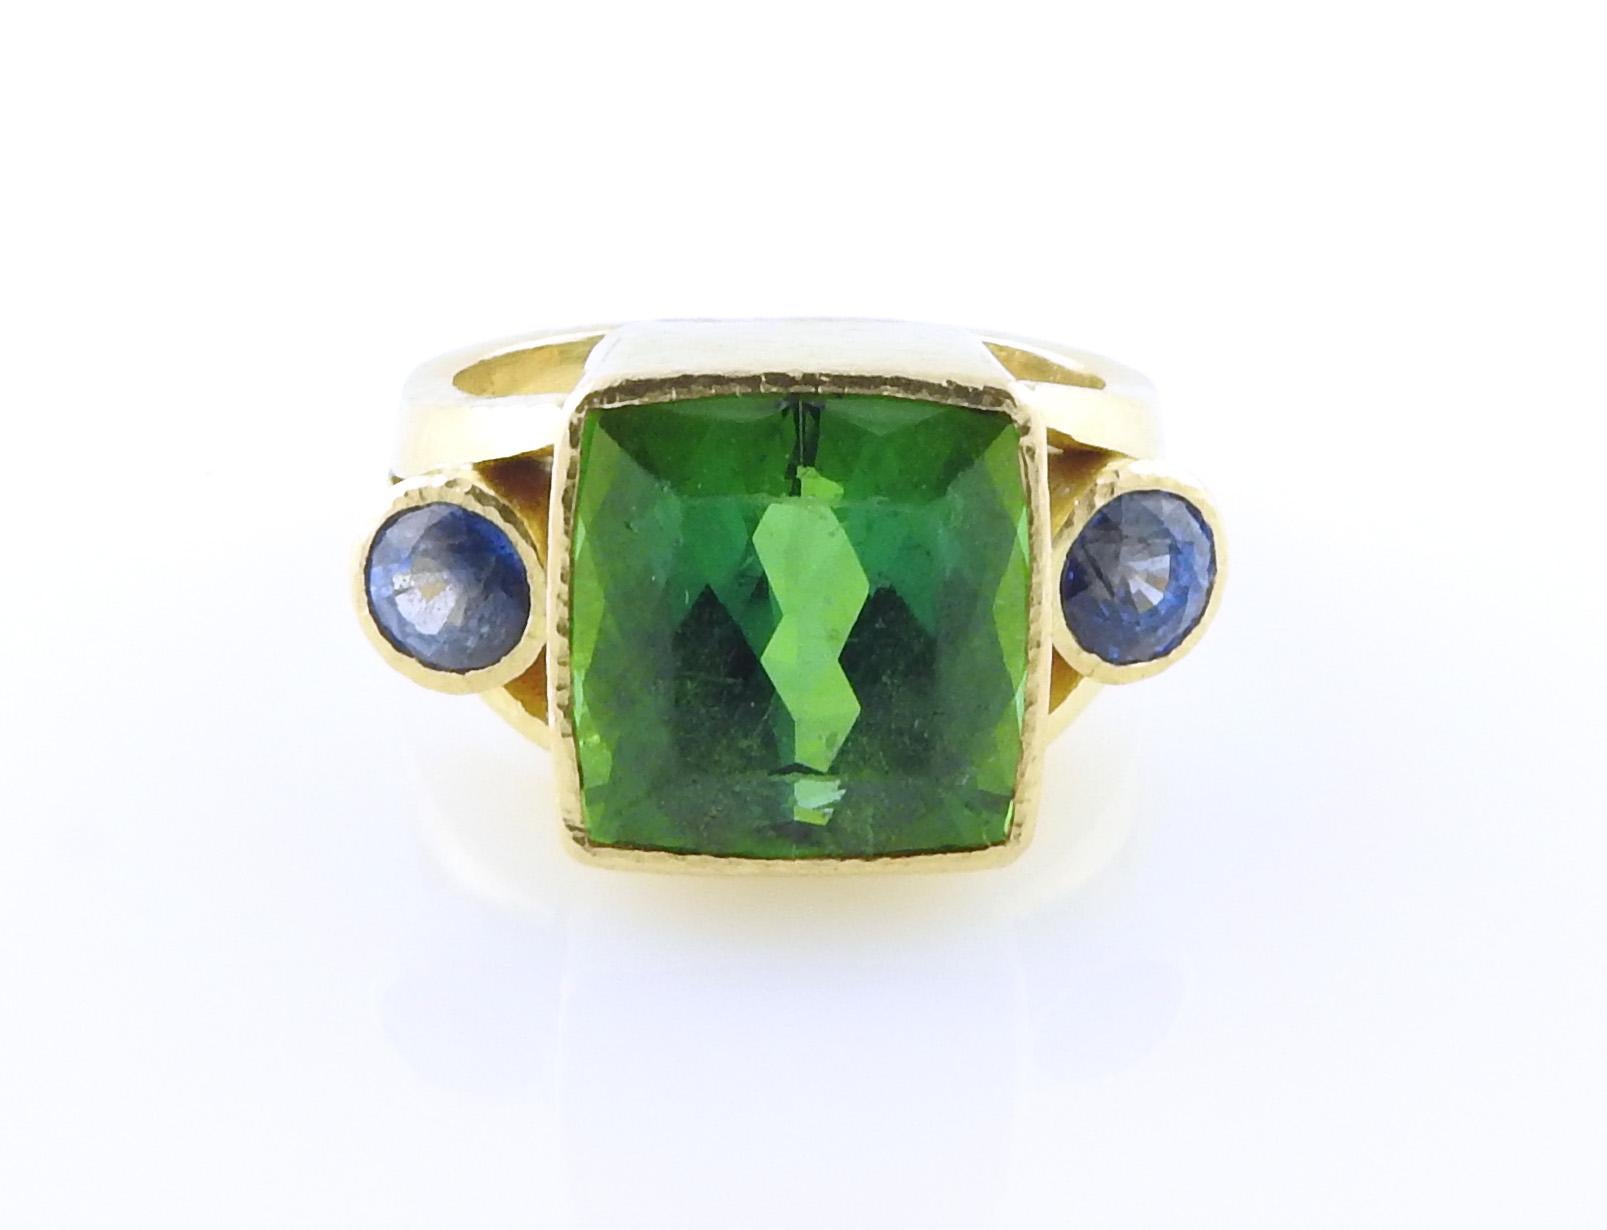 Elizabeth Locke 18K Gold Cocktail Ring

This beautiful Elizabeth Locke ring is set in 18K Hammered yellow Gold

Center stone is a faceted green tourmaline. Stone is approx. 10.7mm x 10.1mm. There are multiple nicks and scratches to this stone, noted